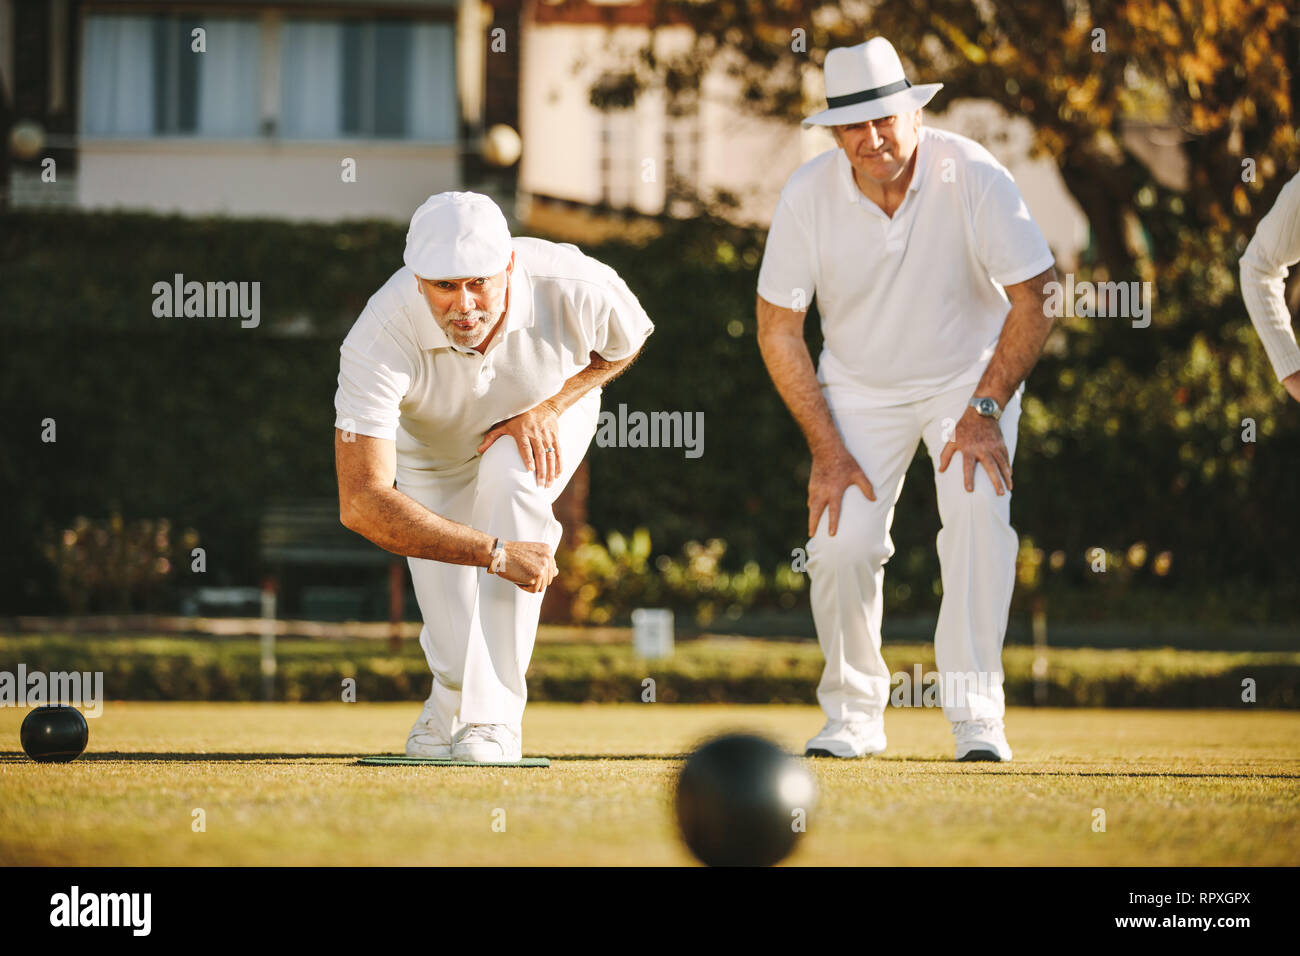 Two senior men playing boules in a park. Elderly men enjoying a game of boules in a lawn on a sunny day. Stock Photo